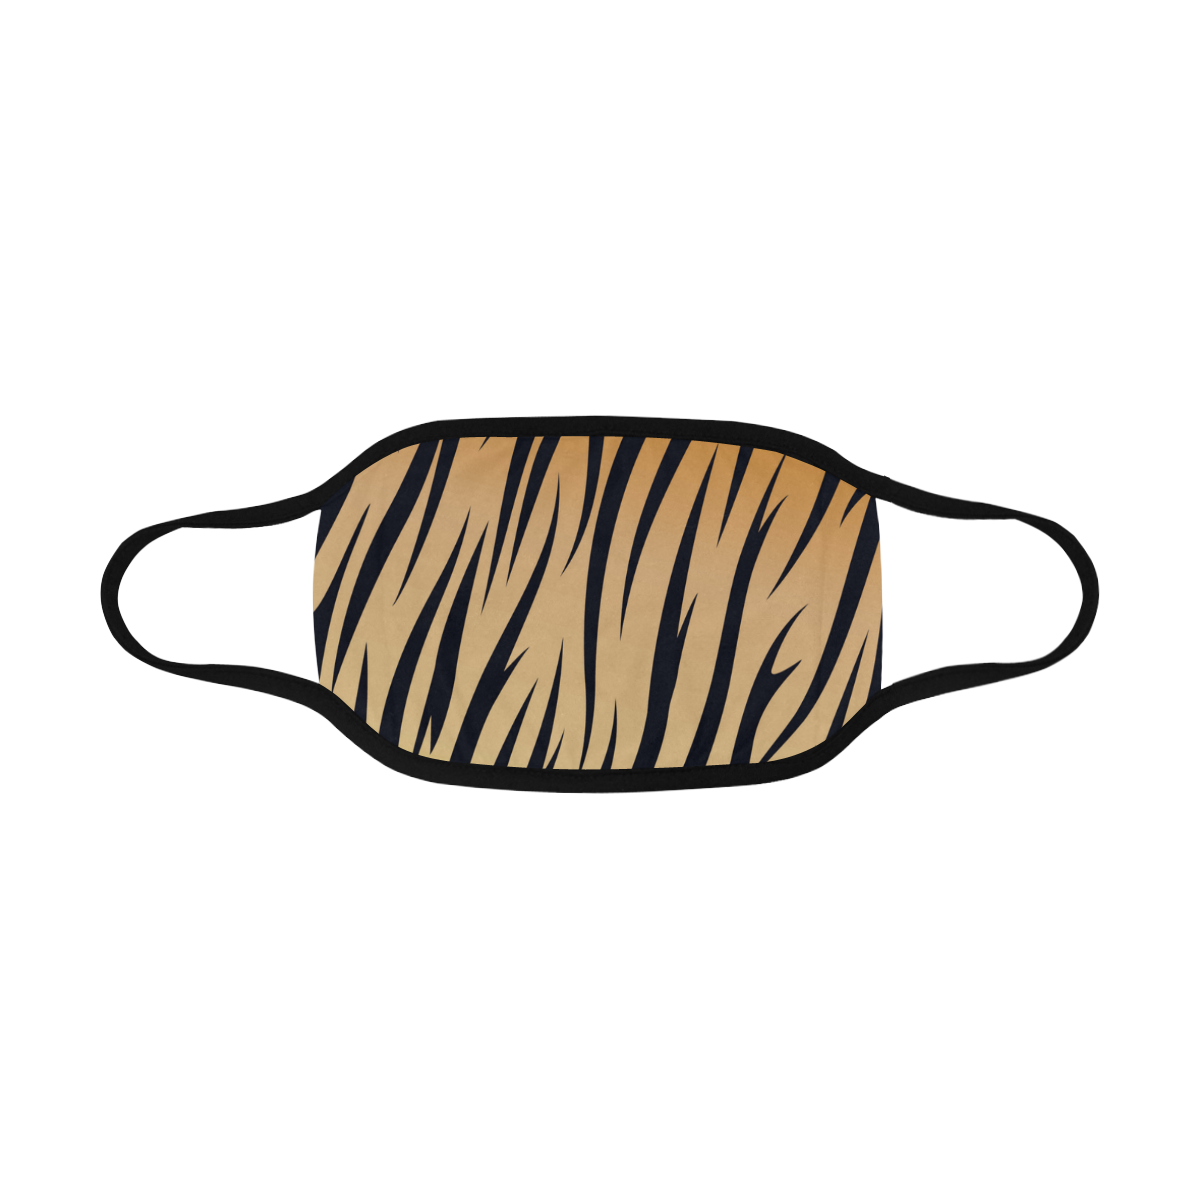 Tiger Mouth Mask